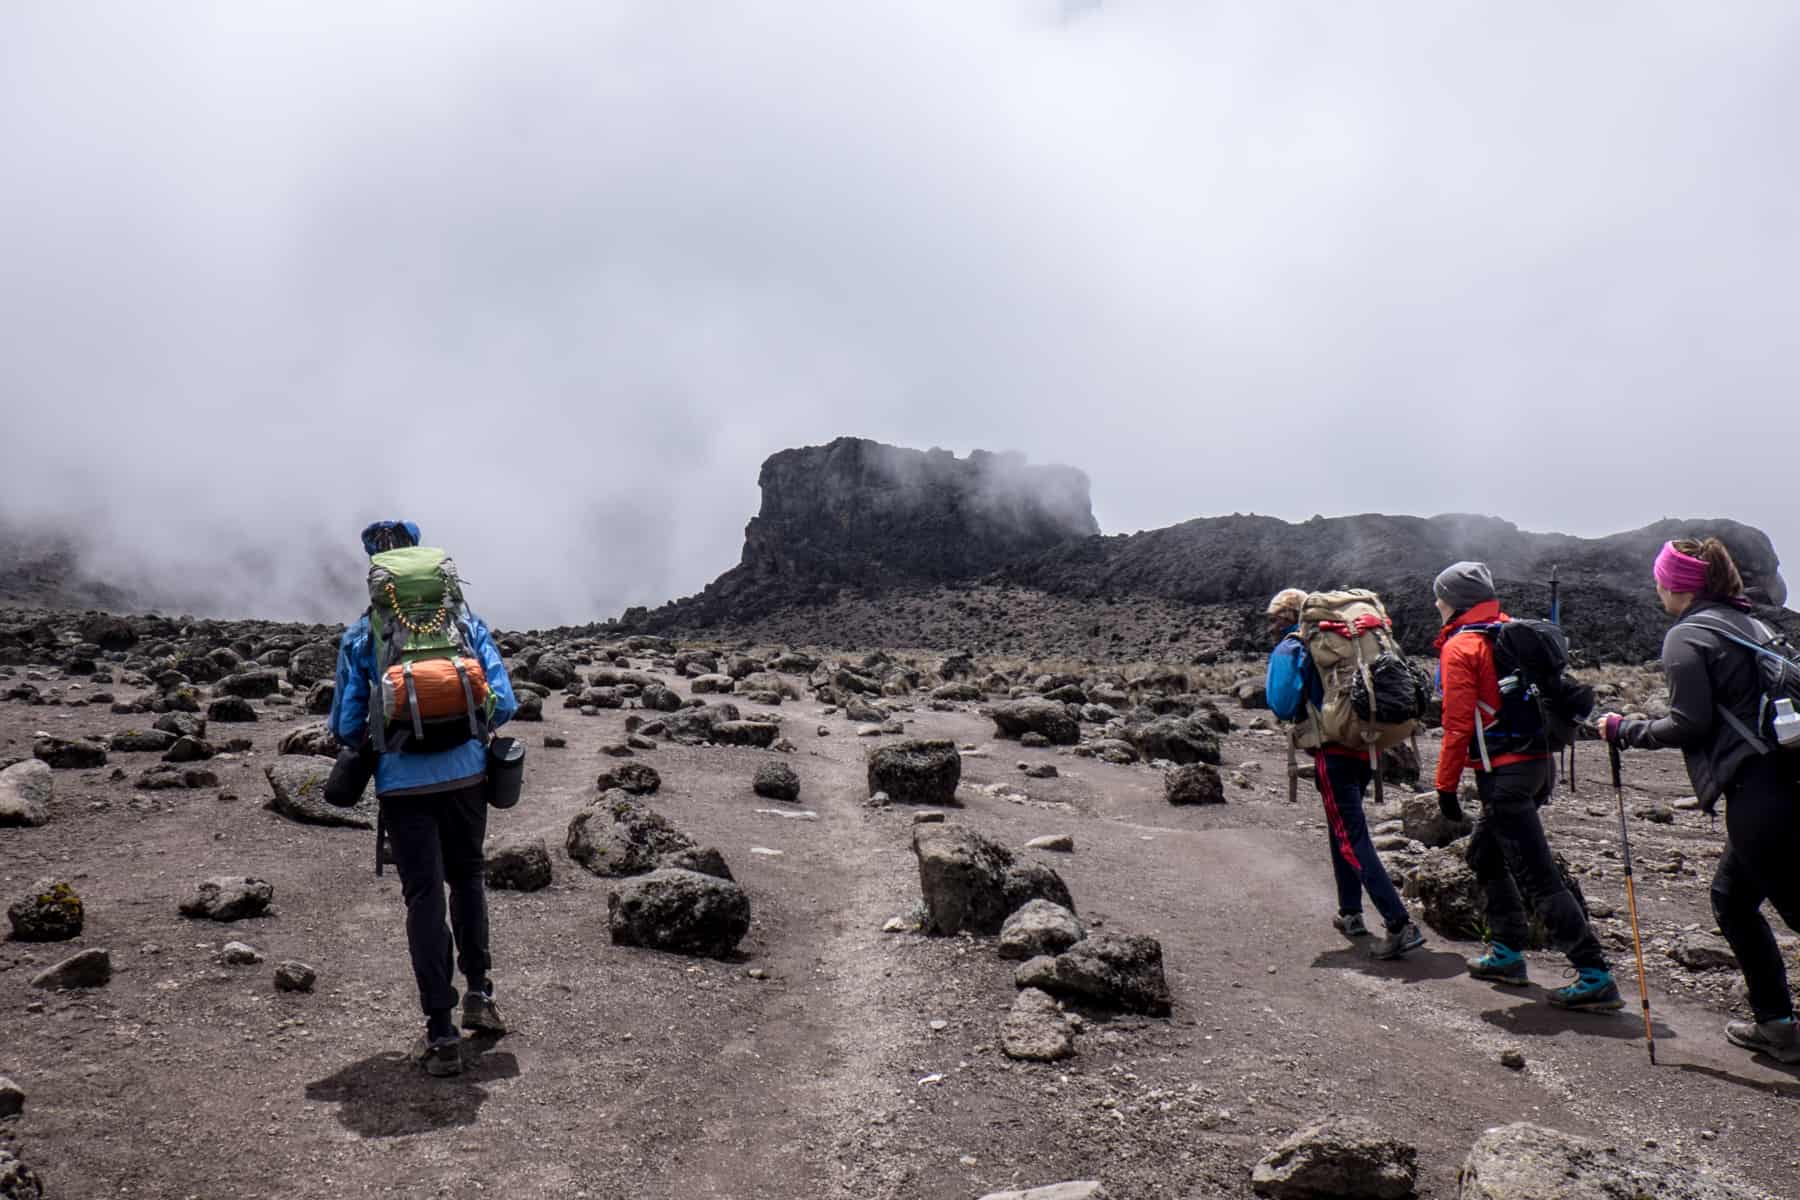 A Kilimanjaro guide on the left and three trekkers on the right pull themselves through the thin air towards the rectangular rock known as the Lava Tower.